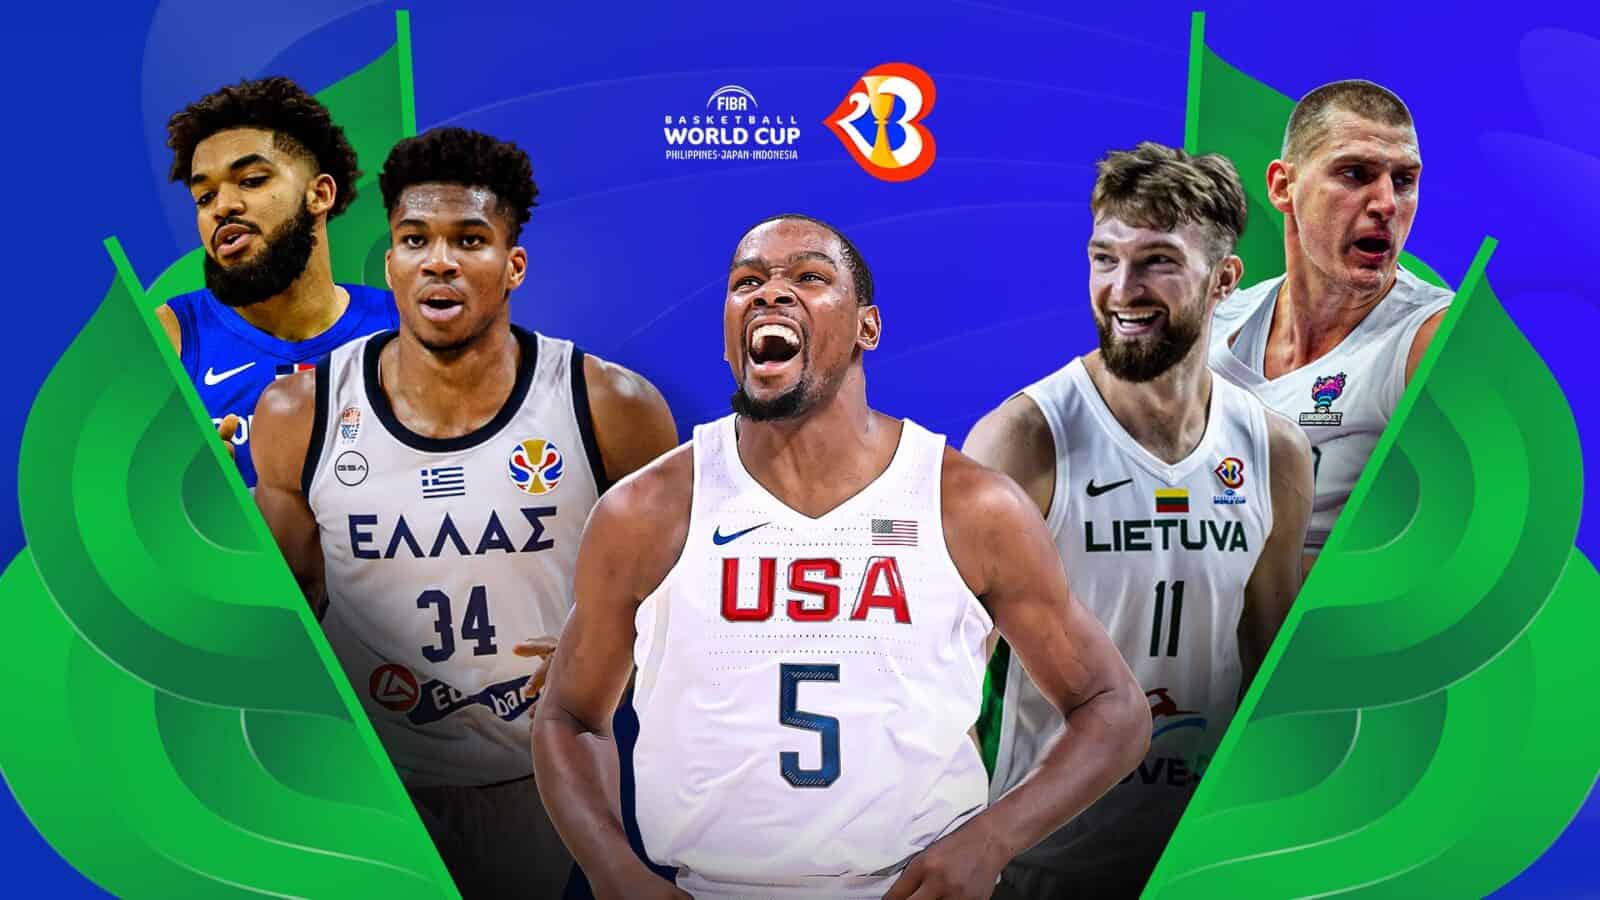 FIBA Partners with Venly to Introduce Basketball World Cup NFTs